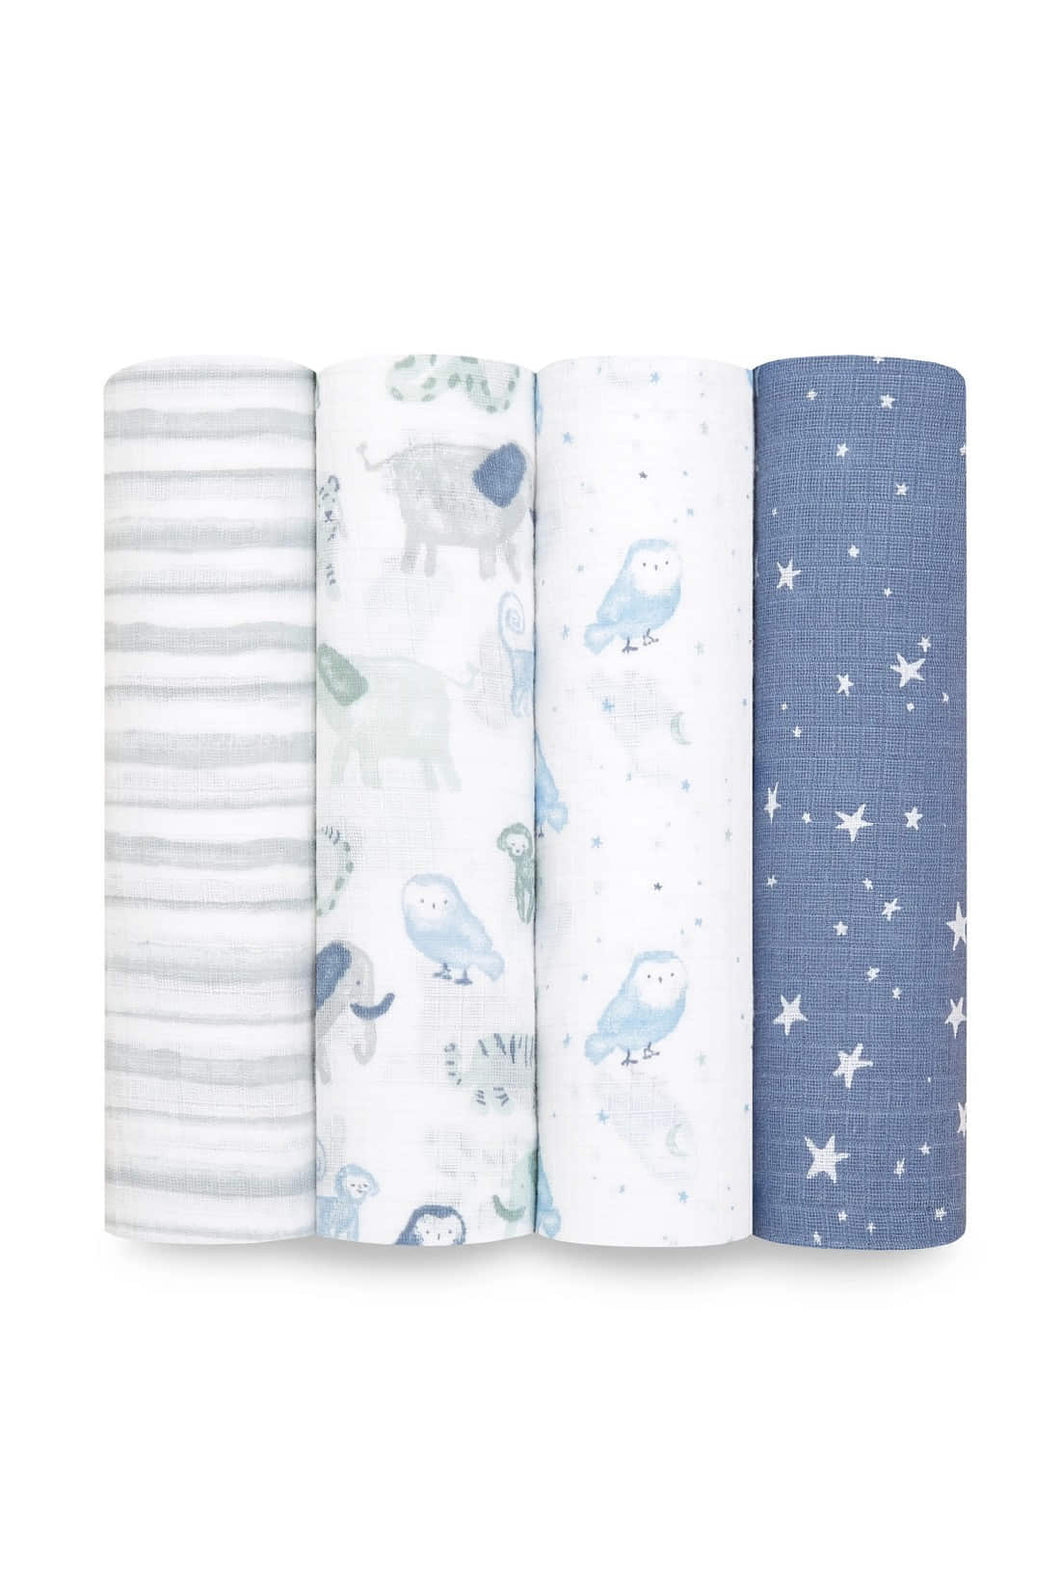 Aden + Anais Essentials Cotton Muslin Swaddles Time To Dream - 4 Pack 1